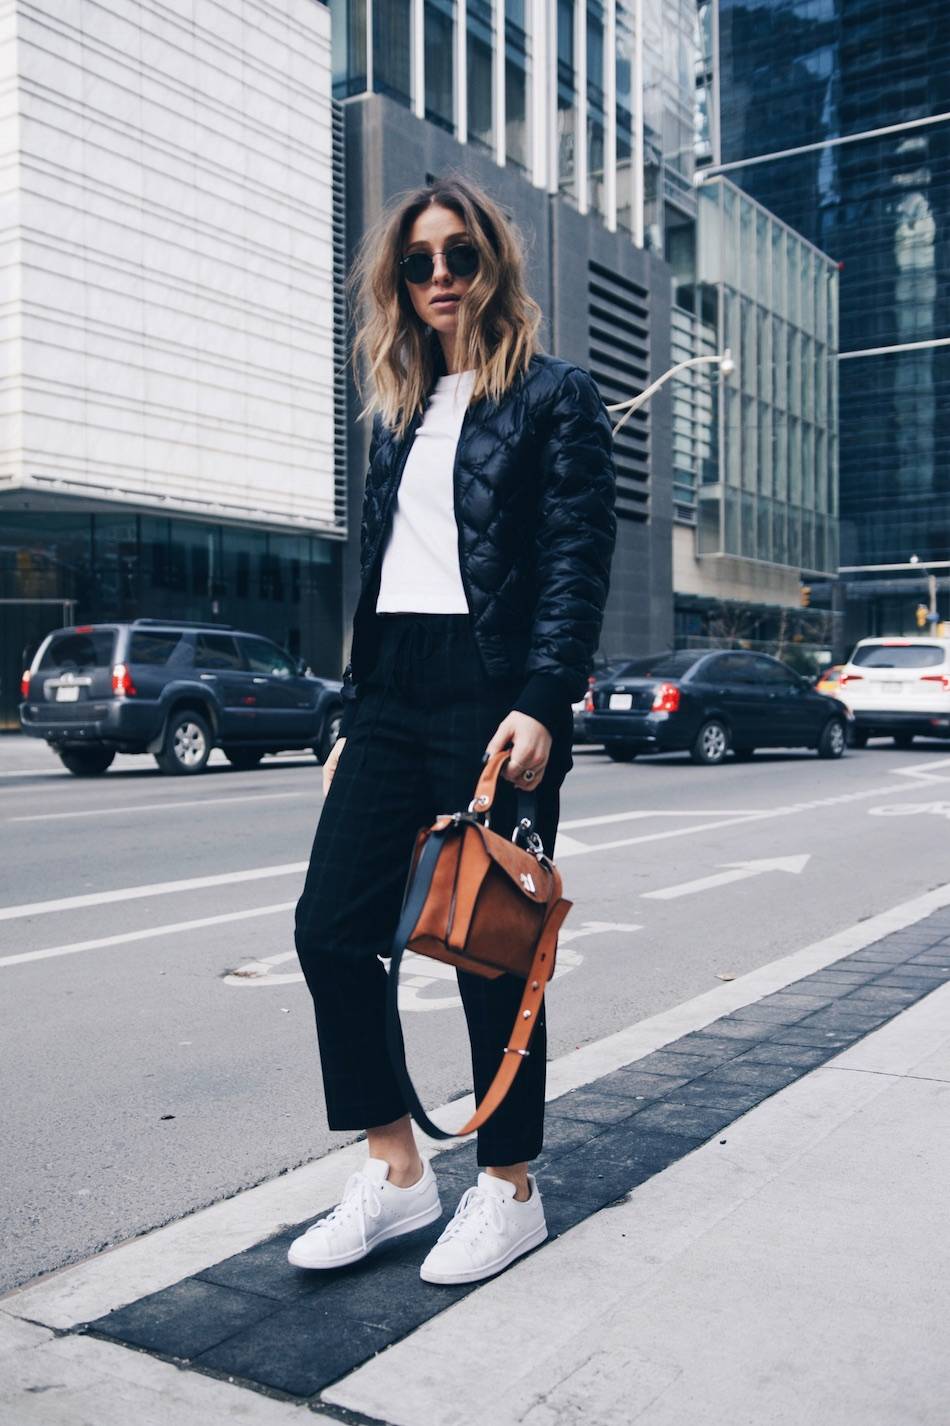 Style and beauty blogger Jill Lansky of The August Diaries on morning routine in athletic fashion trend 2017 Adidas stan smith, bomber jacket, white tee, Proenza Schouler Hava bag